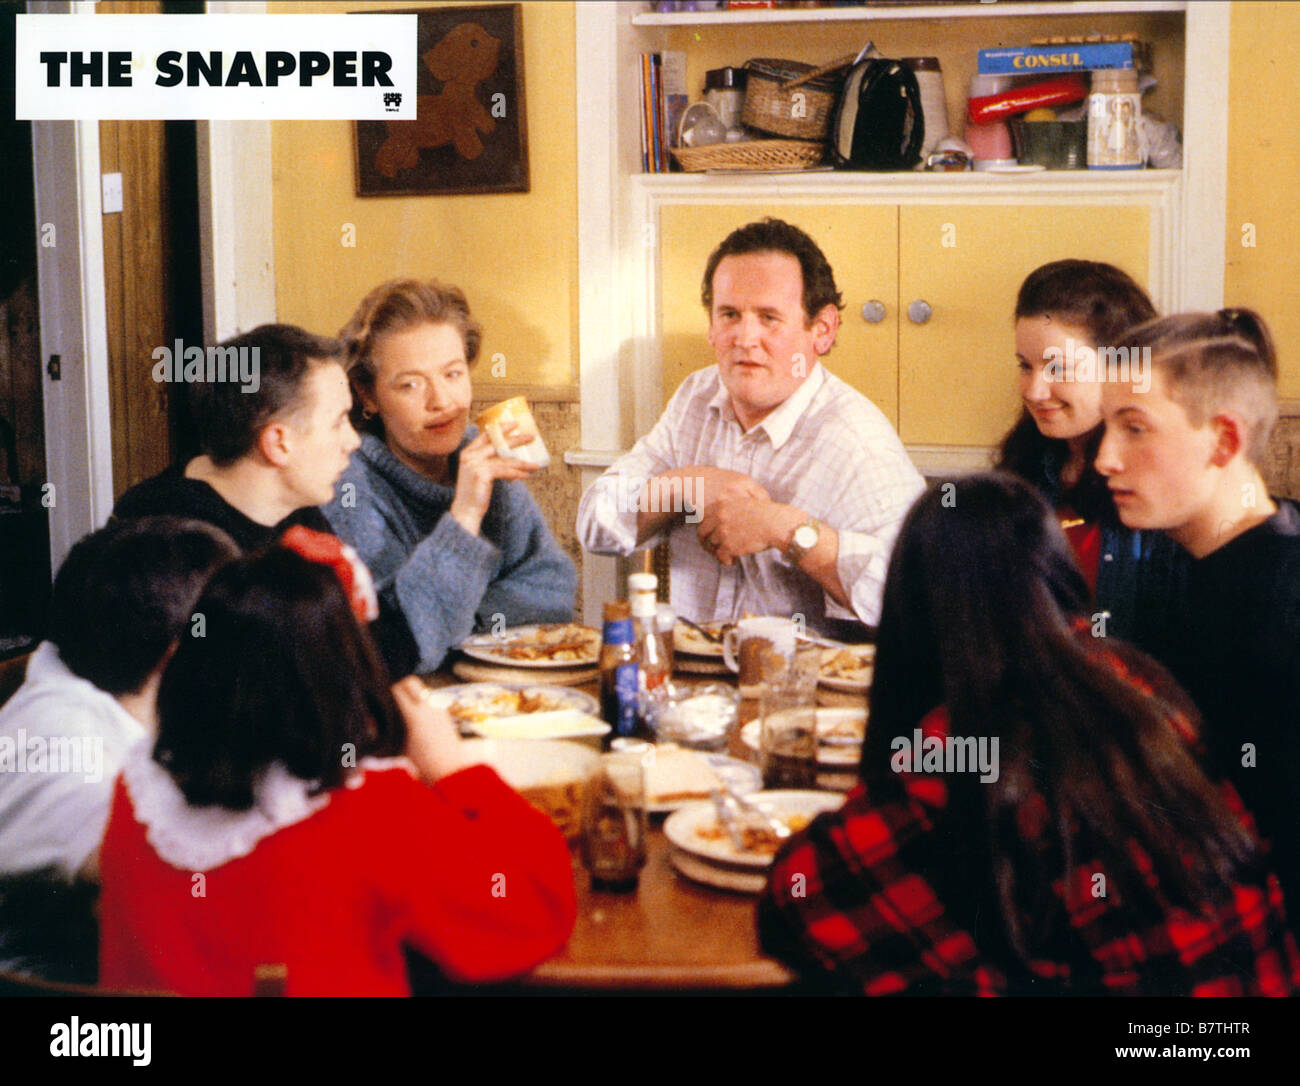 The Snapper The Snapper Year: 1993 - uk Tina Kellegher, Ciara Duffy, Colm  OByrne, Colm Meaney, Ruth McCabe, Peter Rowan, Eanna MacLiam, Joanne  Gerrard Director: Stephen Frears Stock Photo - Alamy